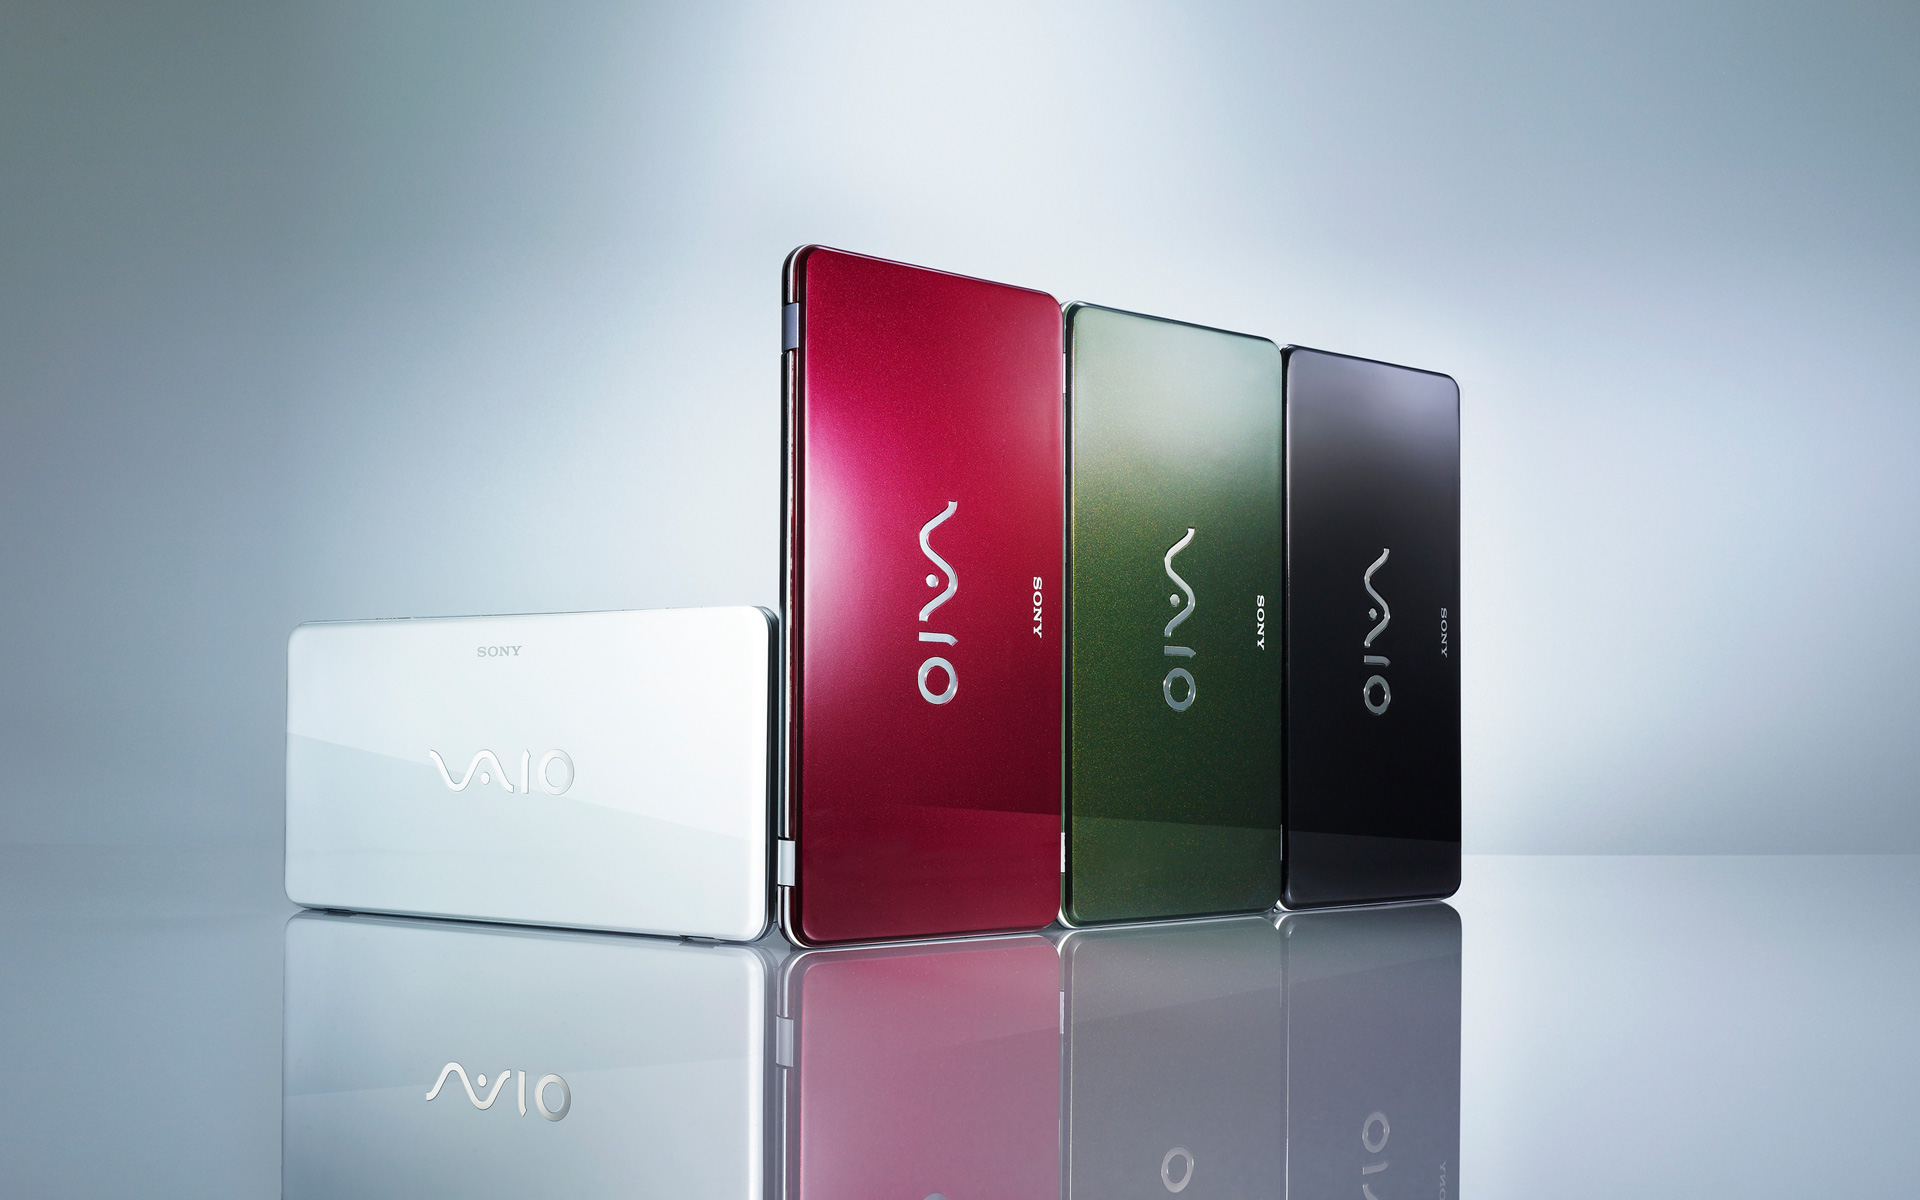 Vaio 4k Wallpapers For Your Desktop Or Mobile Screen Free And Easy To Download